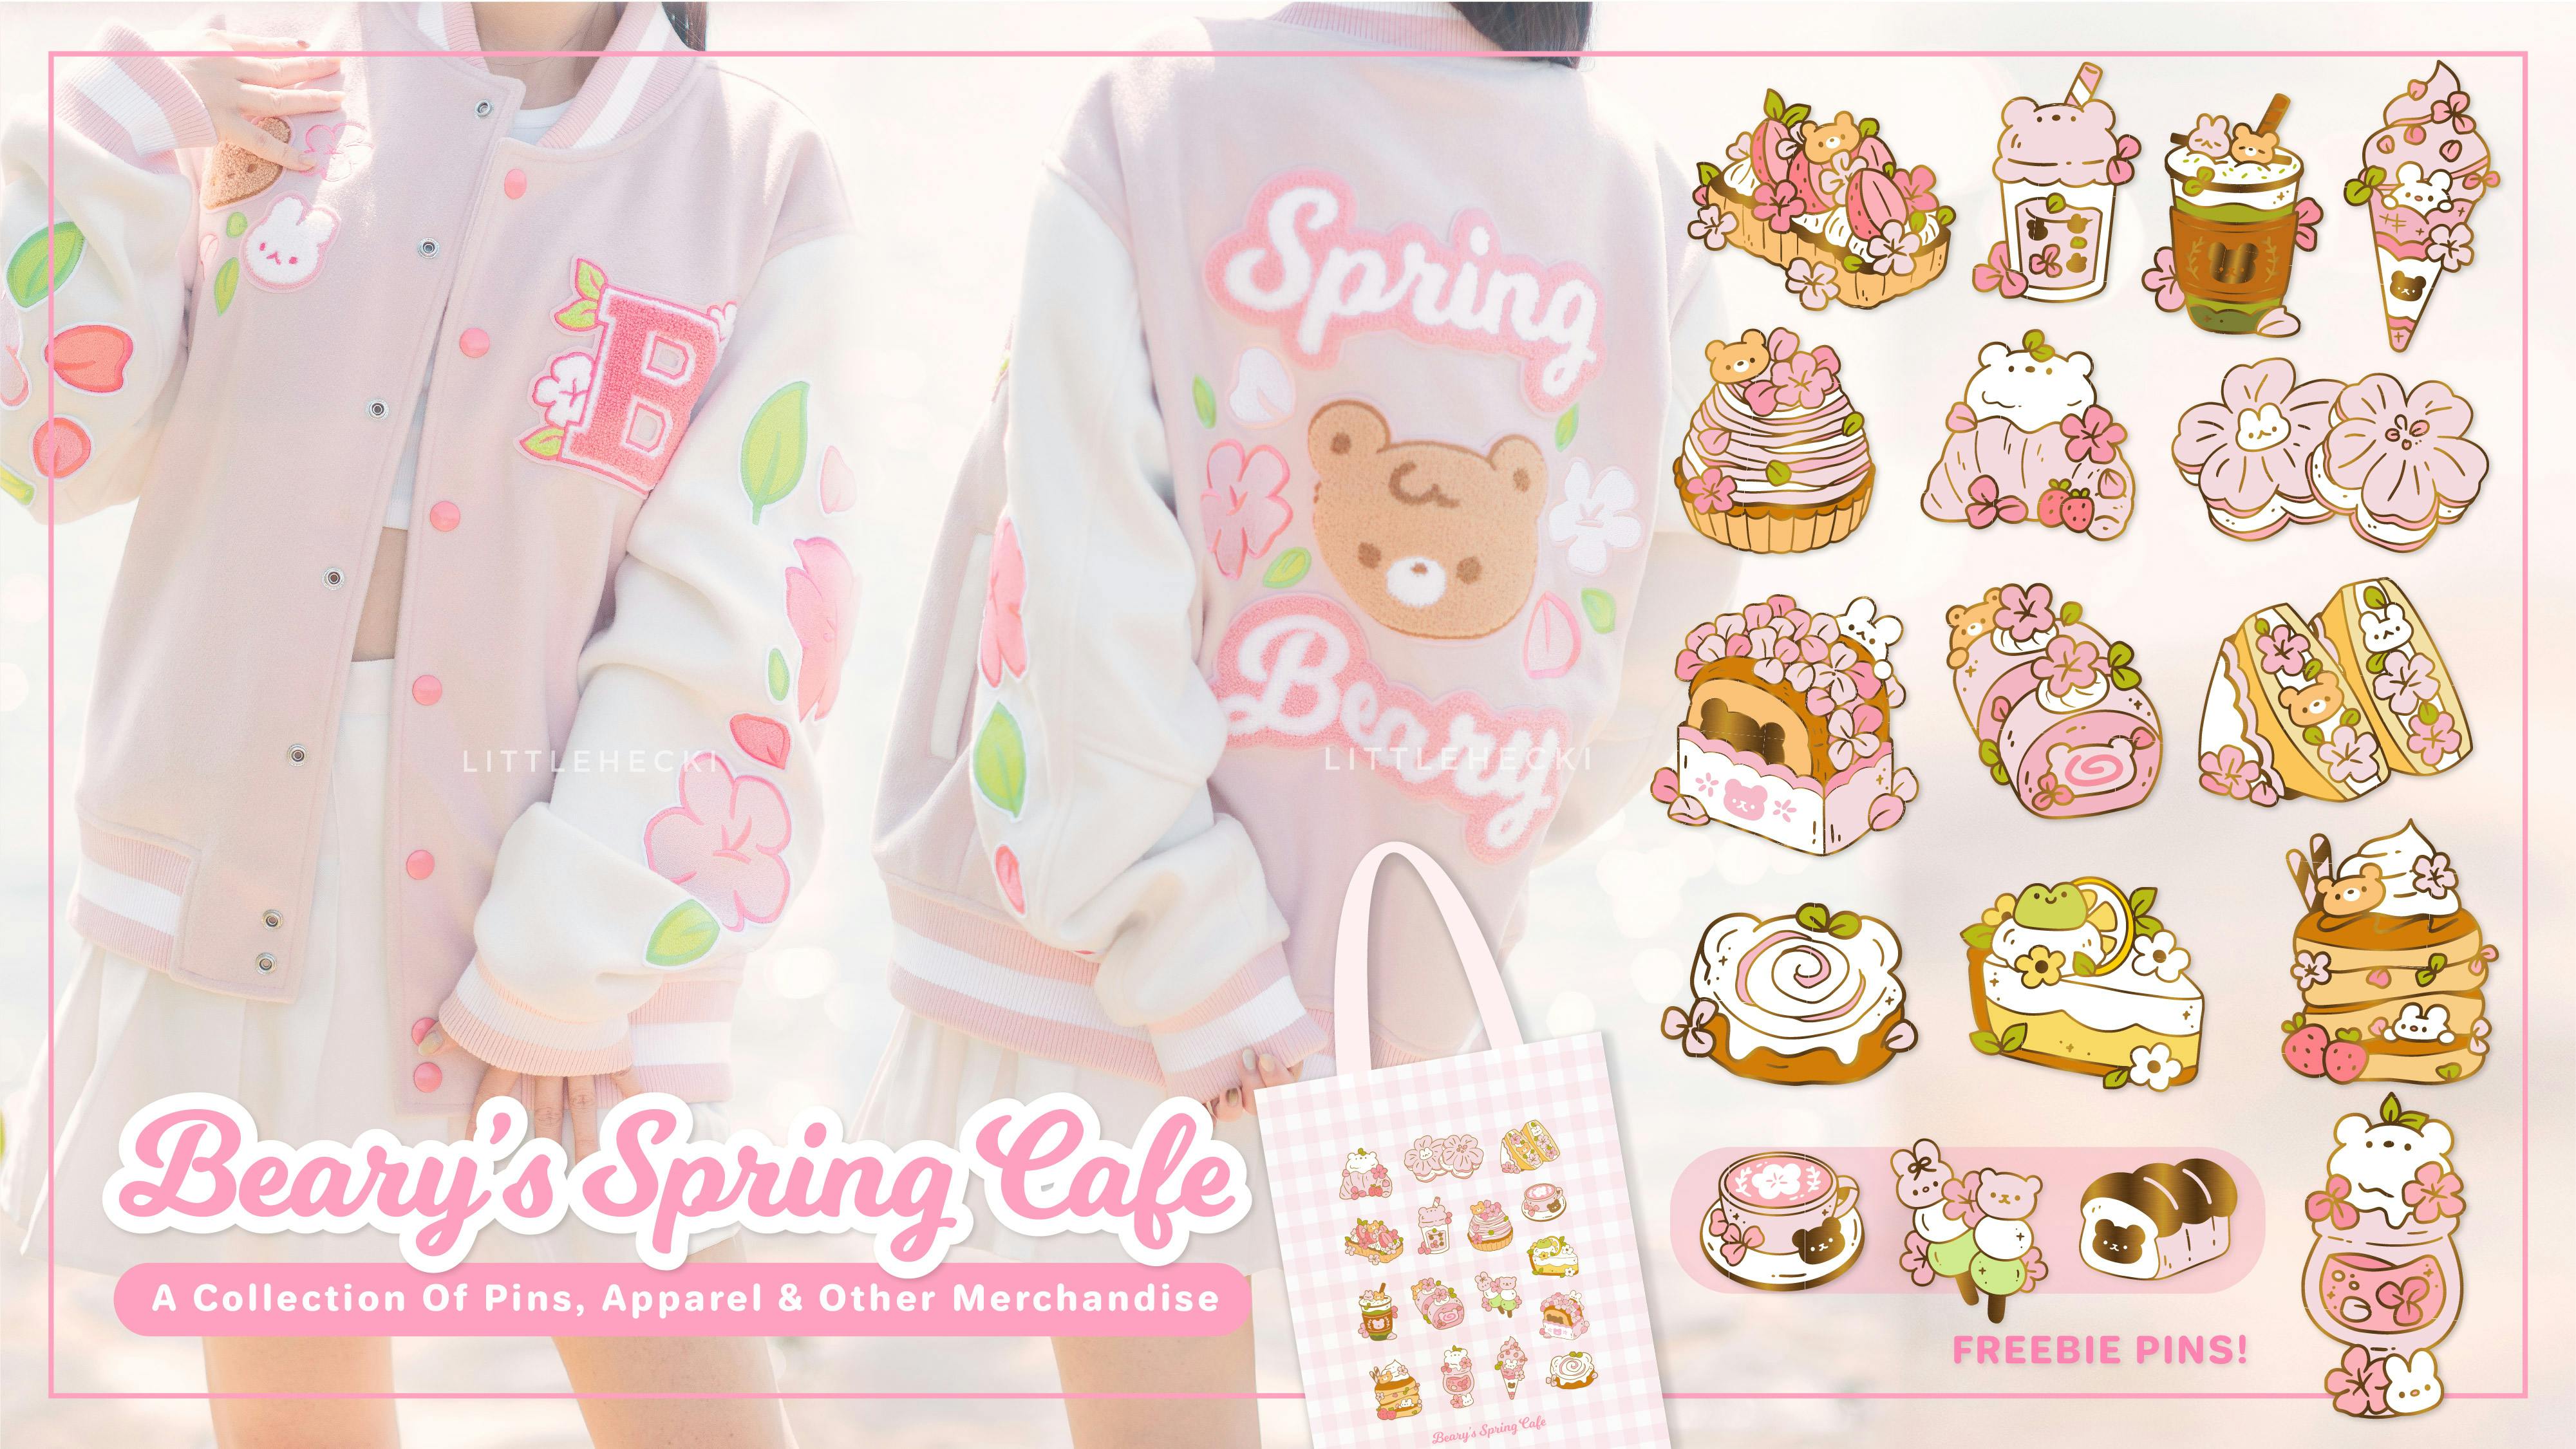 Beary's Spring Cafe V.2 - A Collection Of Spring Desserts Enamel Pins & Apparel